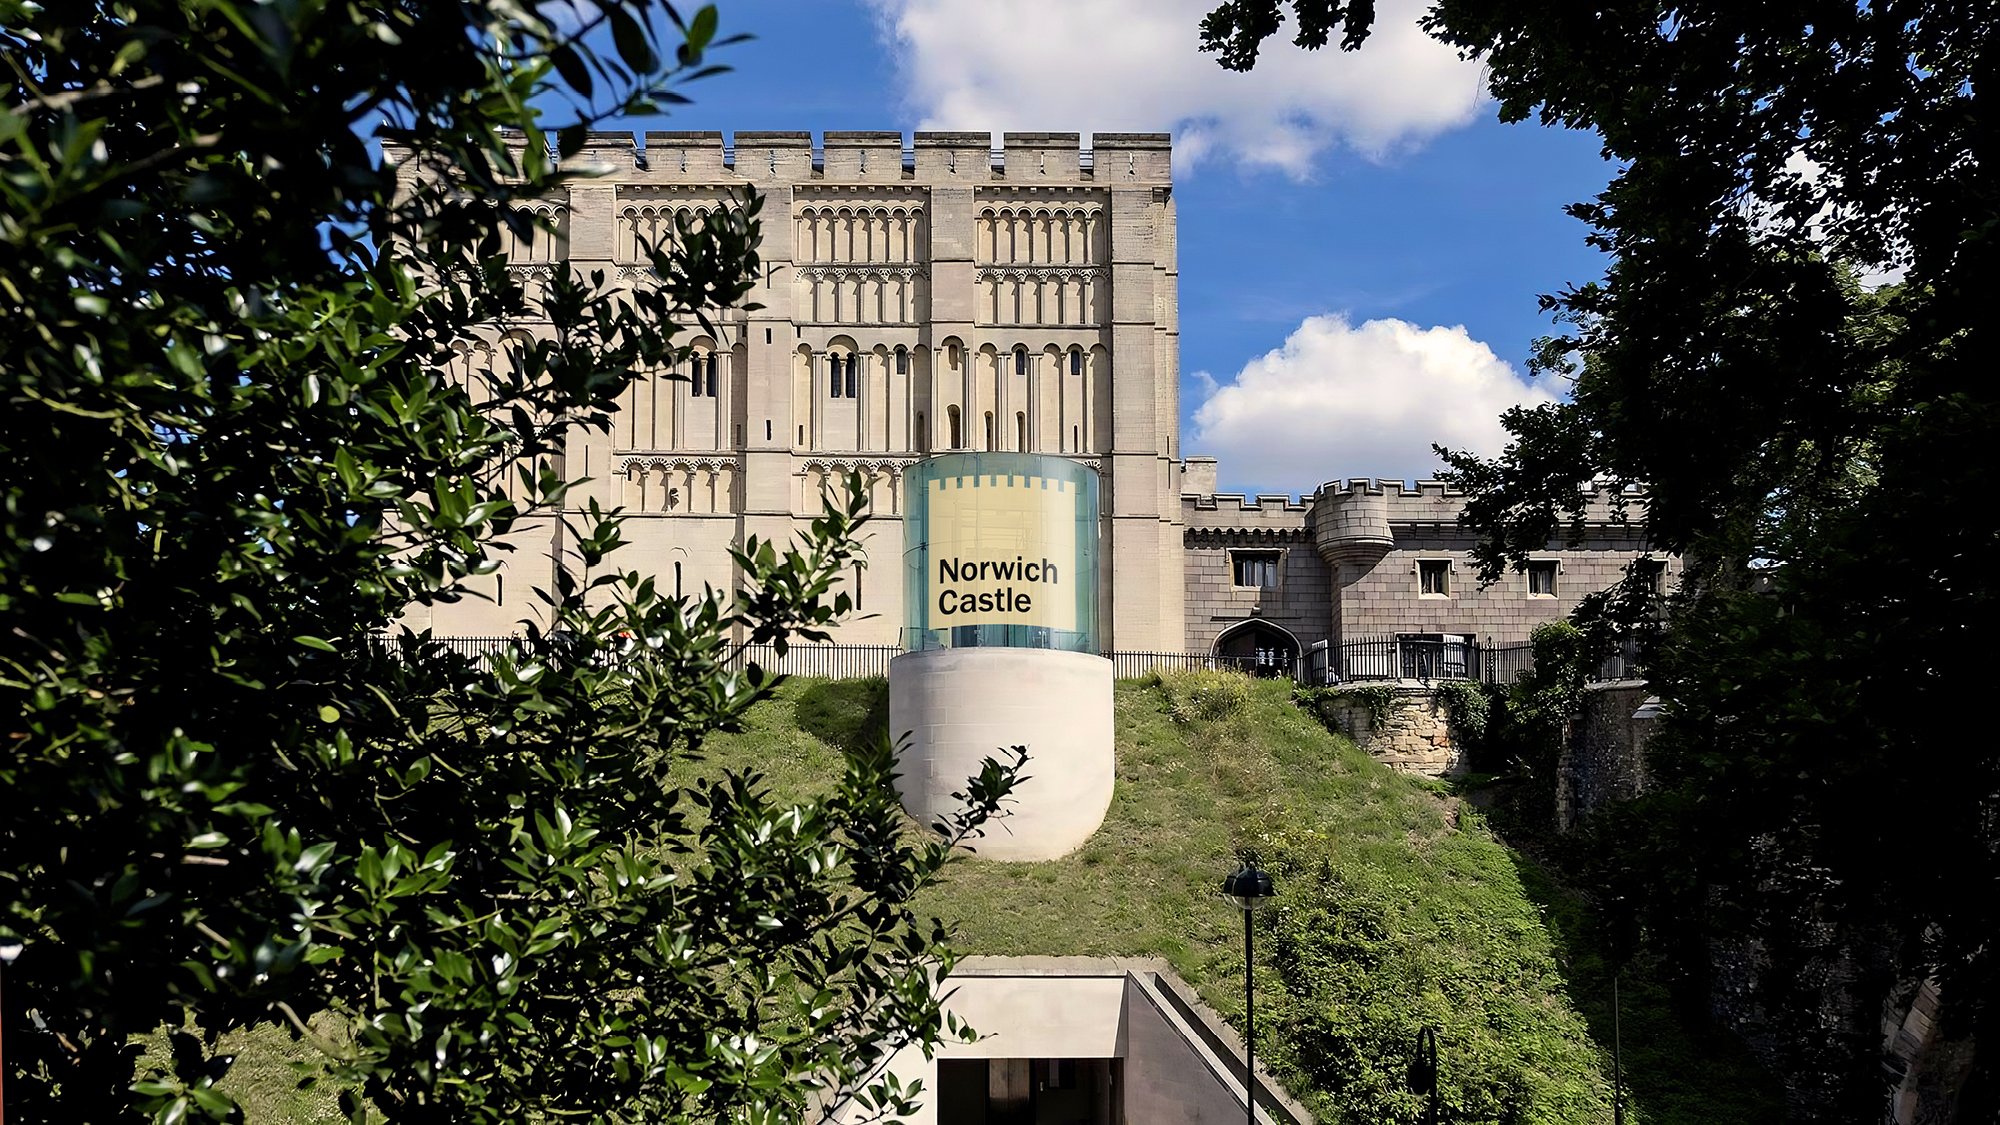 New logo and brand identity for Norwich Castle designed by The Click. Reviewed by Richard Baird for BP&O